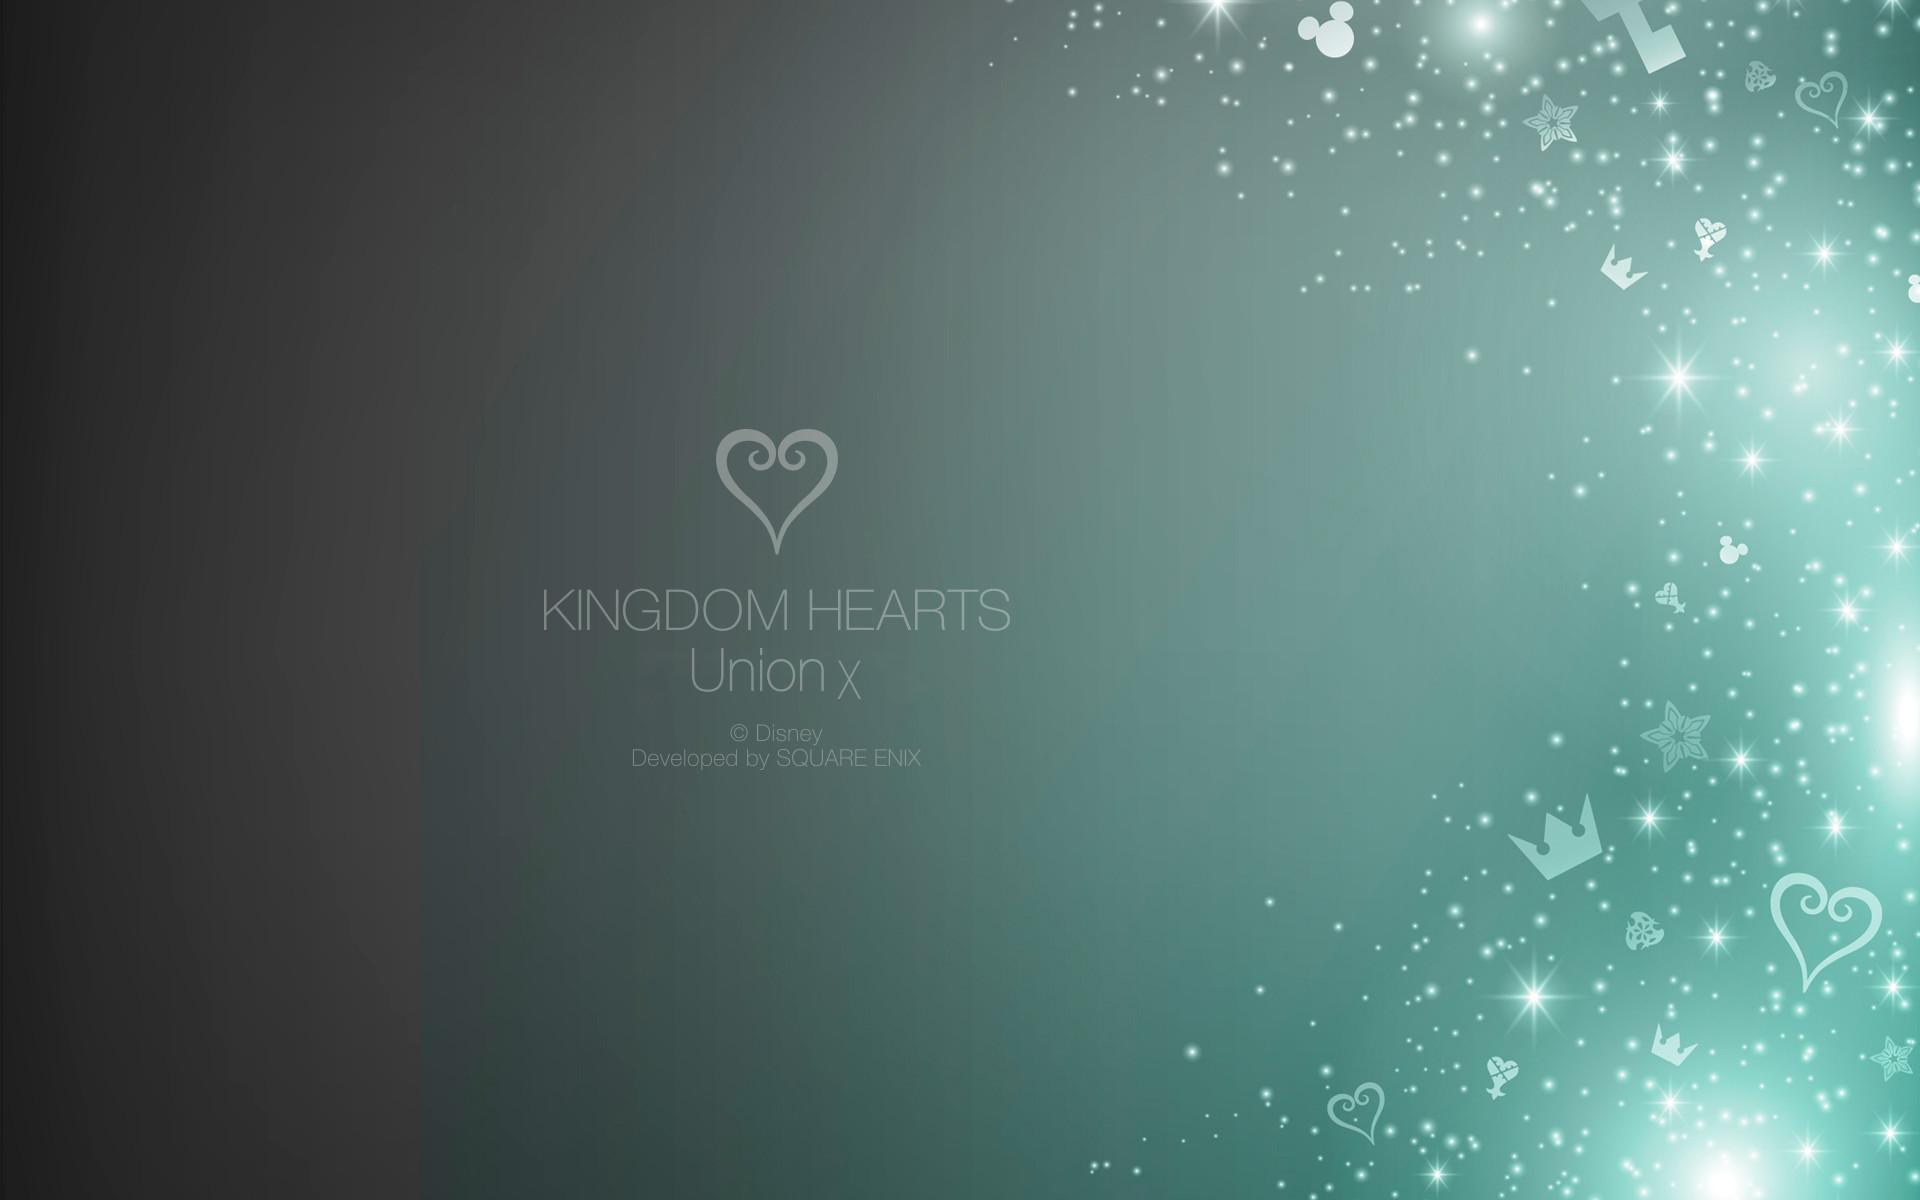 1920x1200 Kingdom Hearts Union X Wallpapers. Android. iPhone